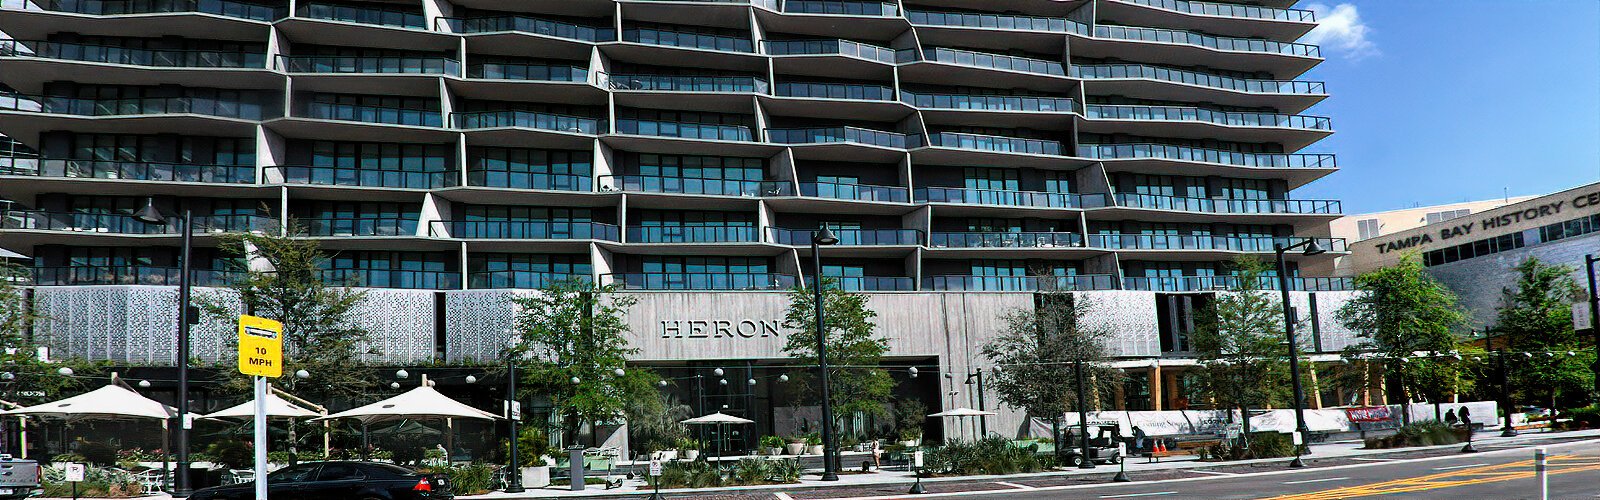  Perched near the water’s edge and a neighbor to the Tampa Bay History Center, Heron, which was the first residential building in the Water Street district, offers luxury lifestyle intertwined with nature.